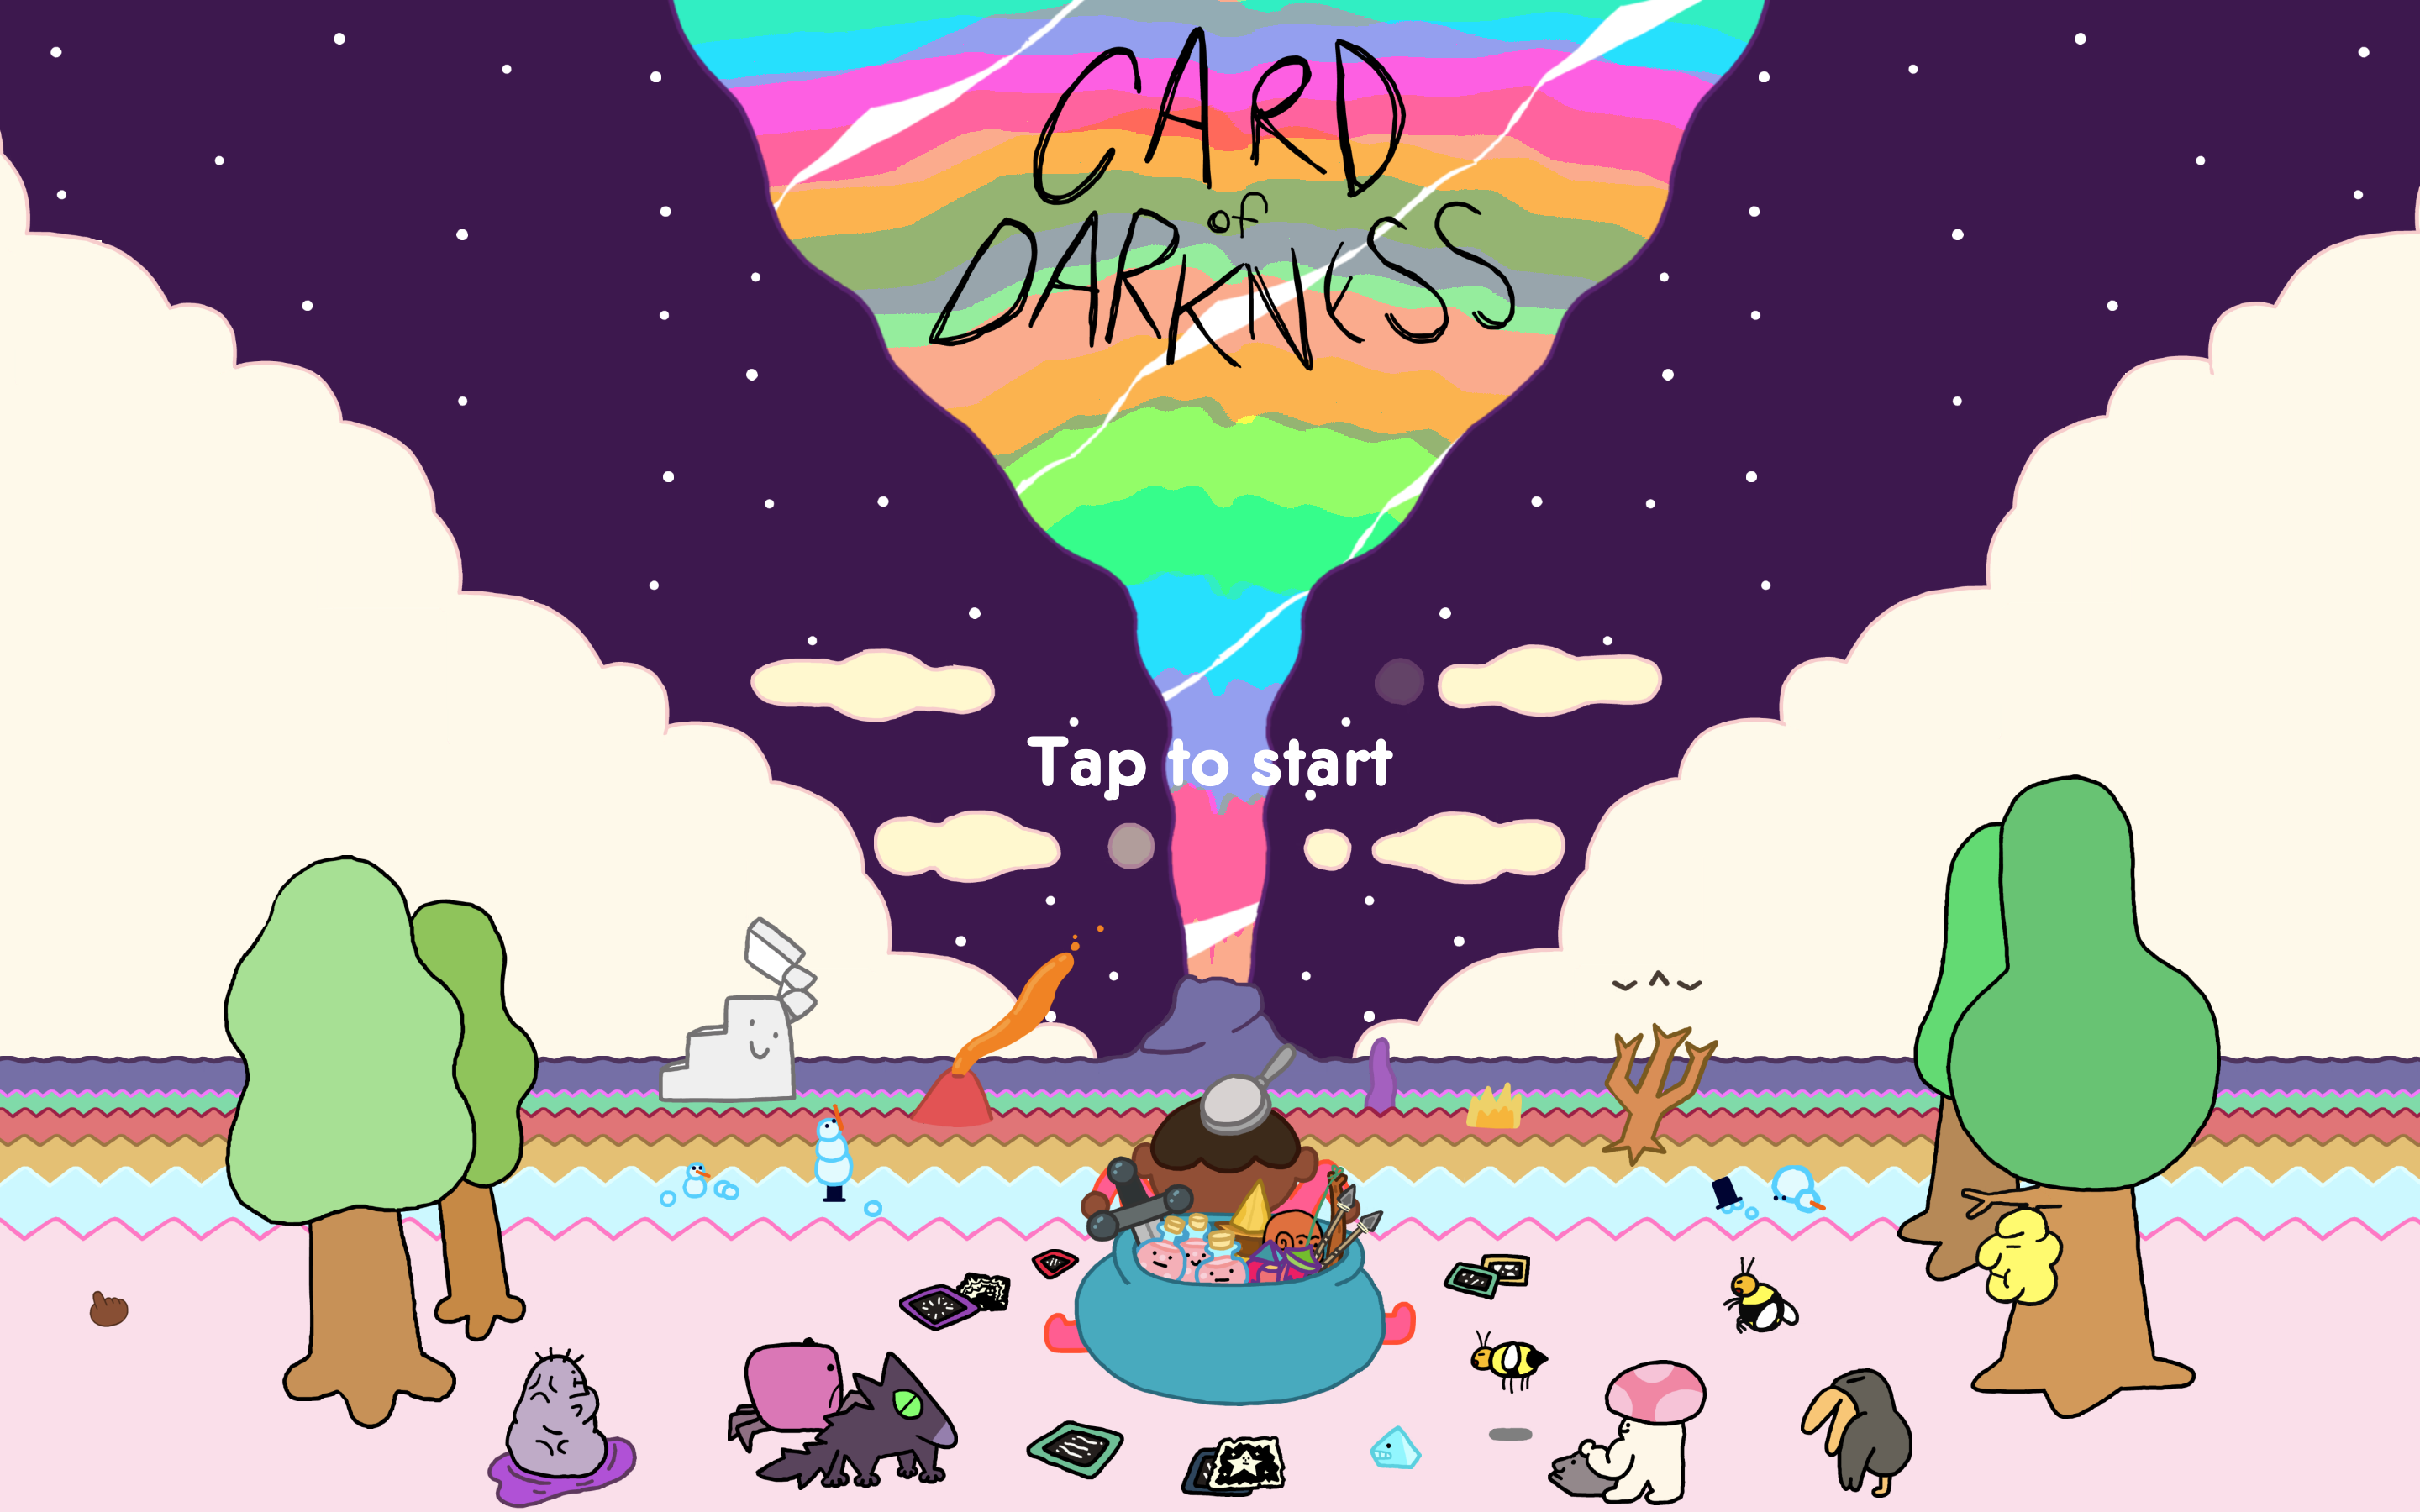 Apple Arcade: â€˜Card of Darknessâ€™ Tips and Tricks to Help You Succeed